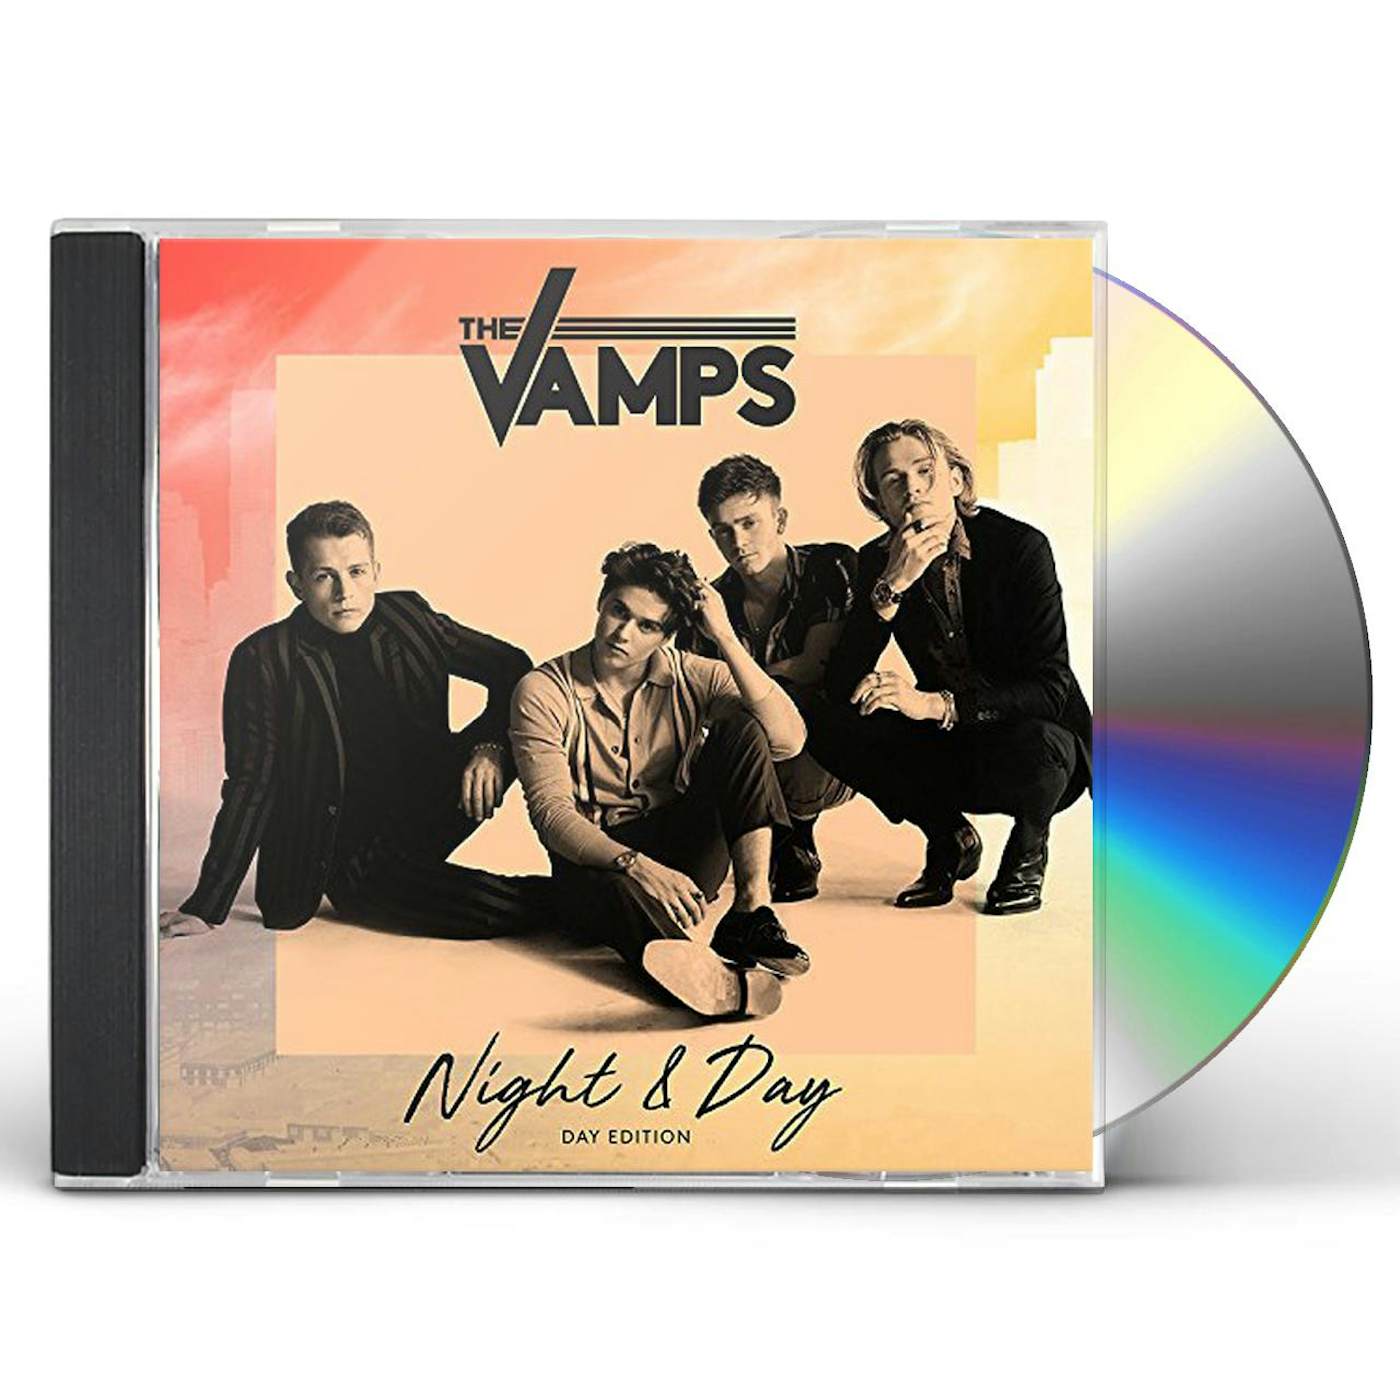 The Vamps NIGHT & DAY: DAY EDITION CD